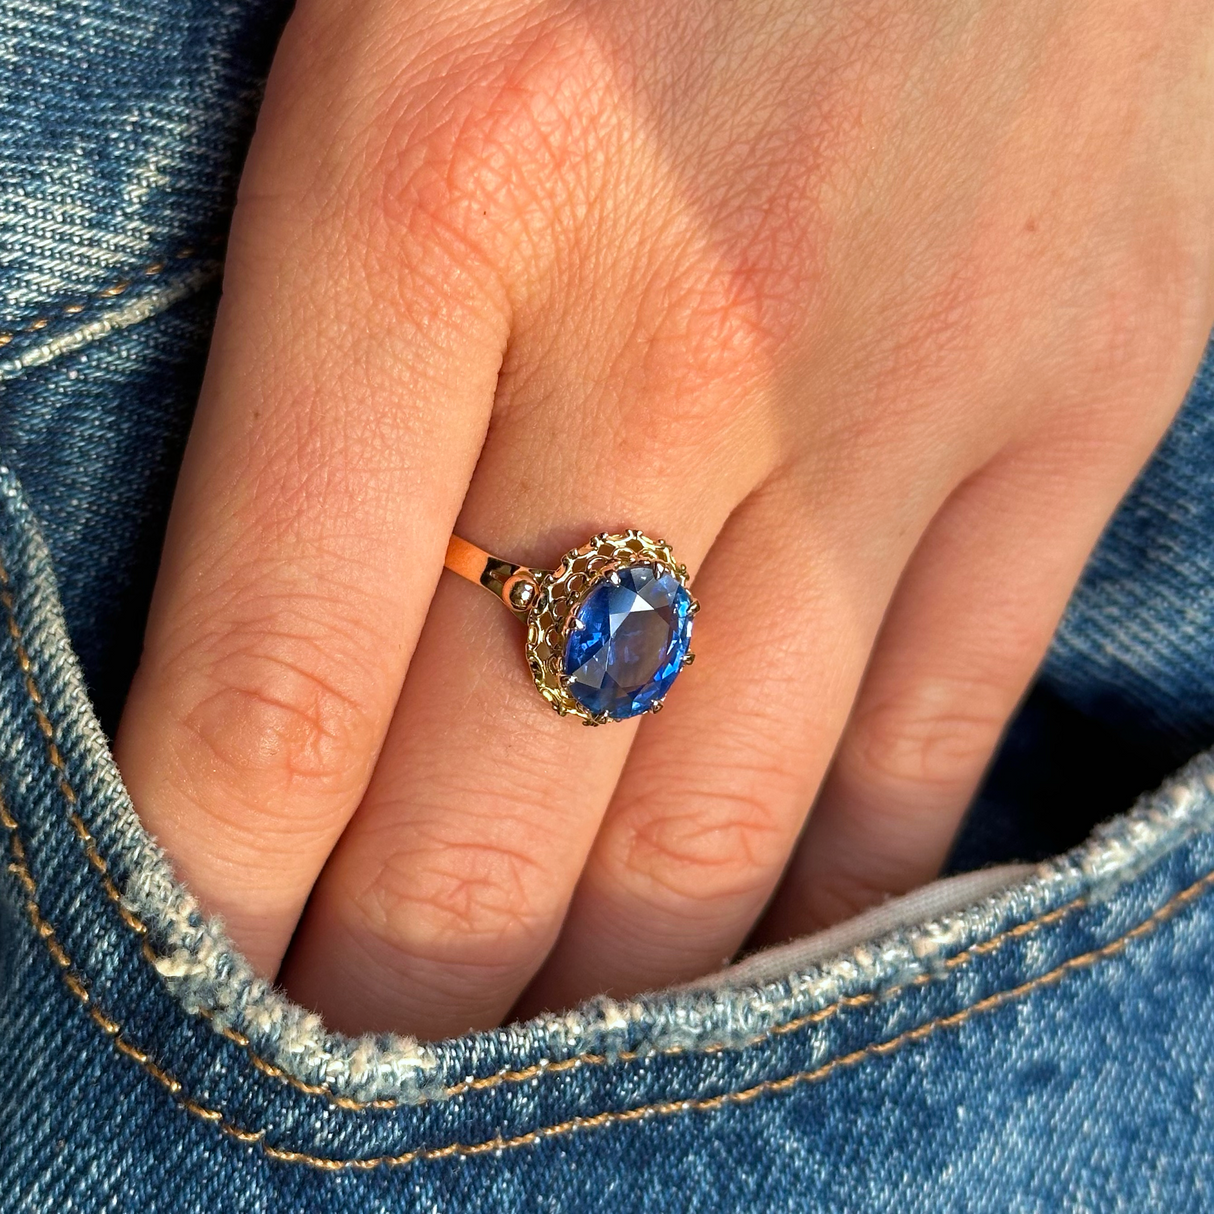 sapphire and yellow gold engagement ring worn on hand in pocket of jeans.